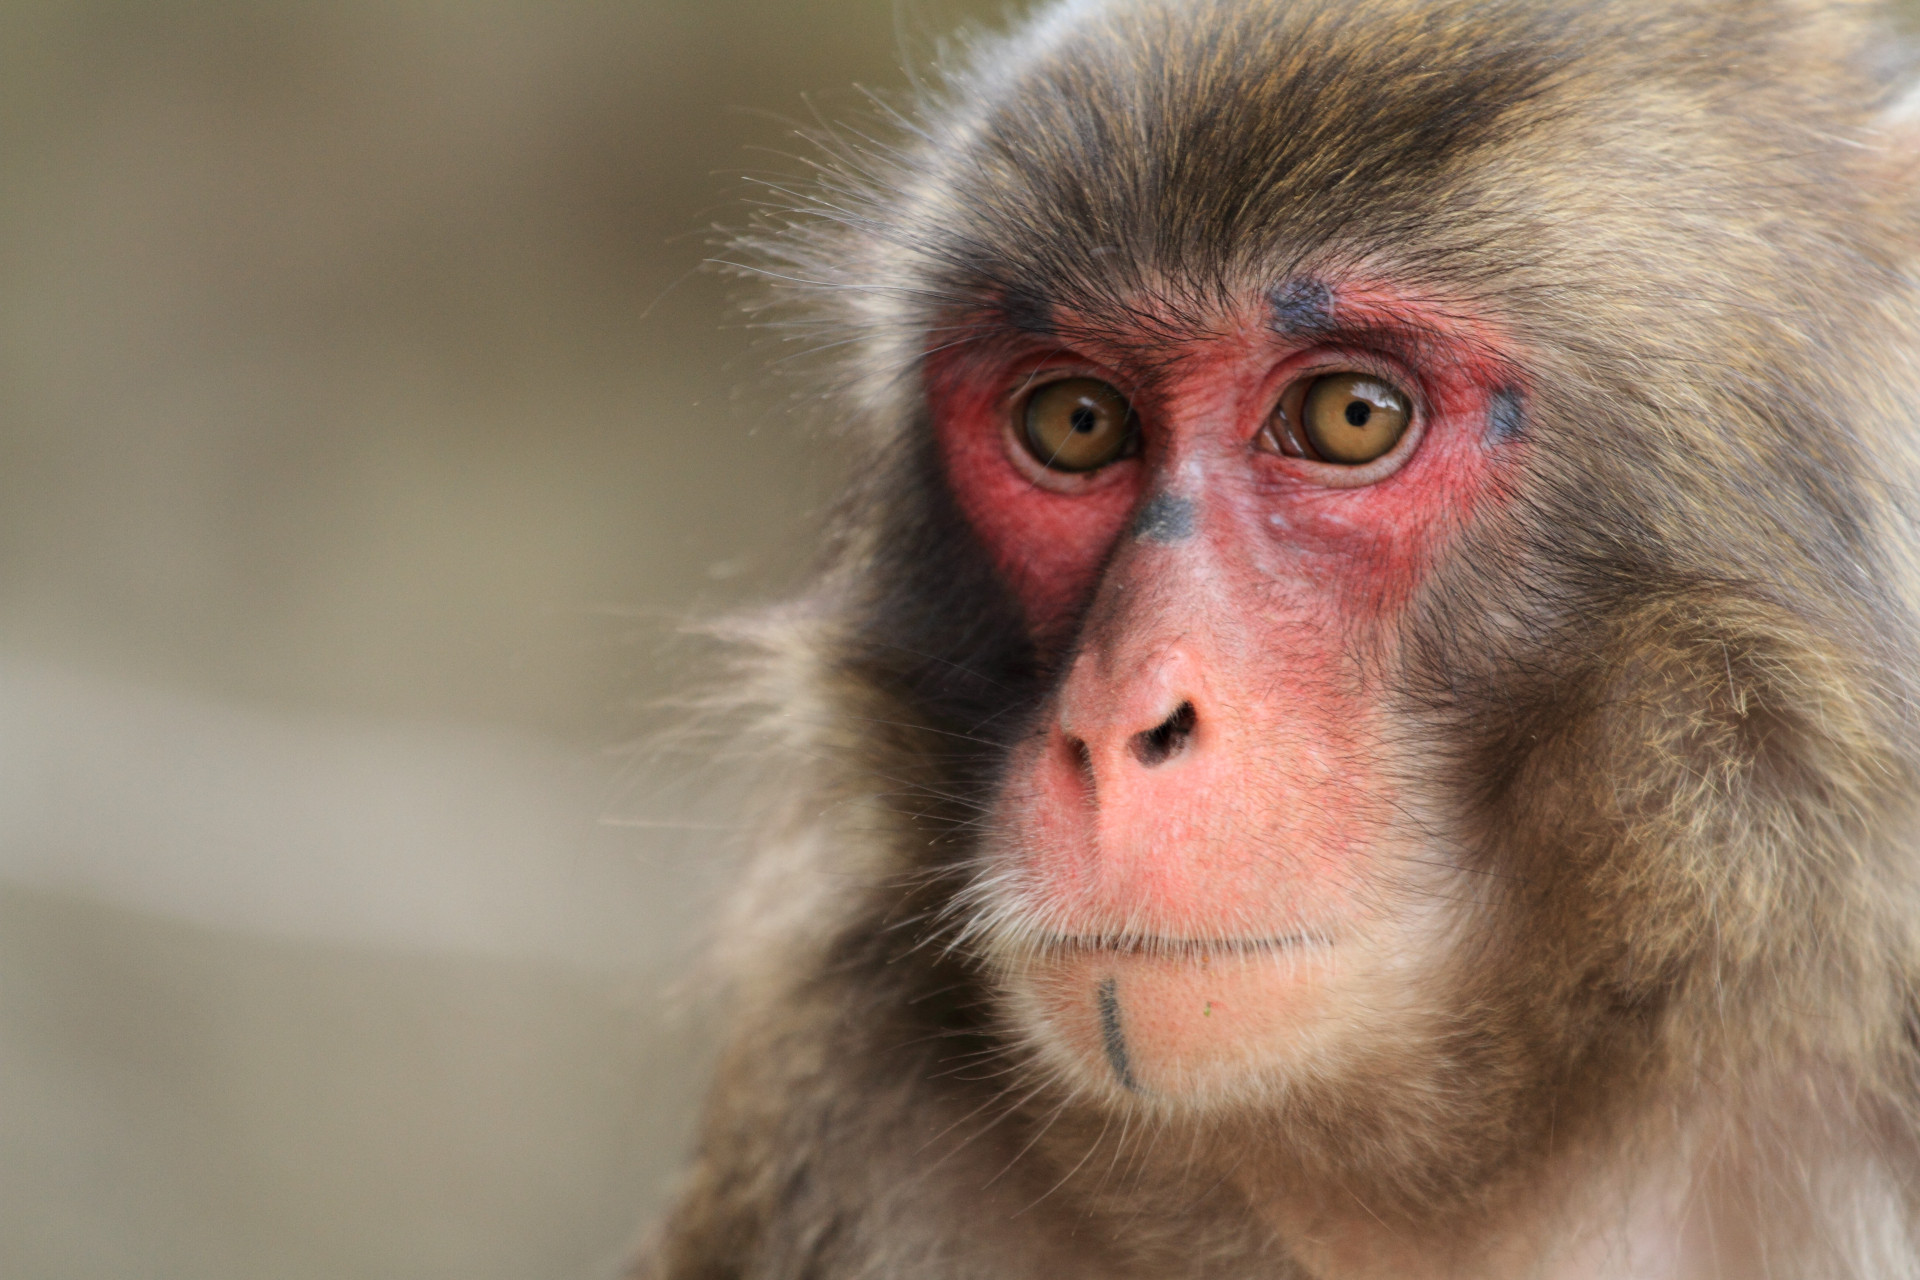 Takasakiyama Monkey Park is quite popular and is home to most of the wild Japanese macaques.